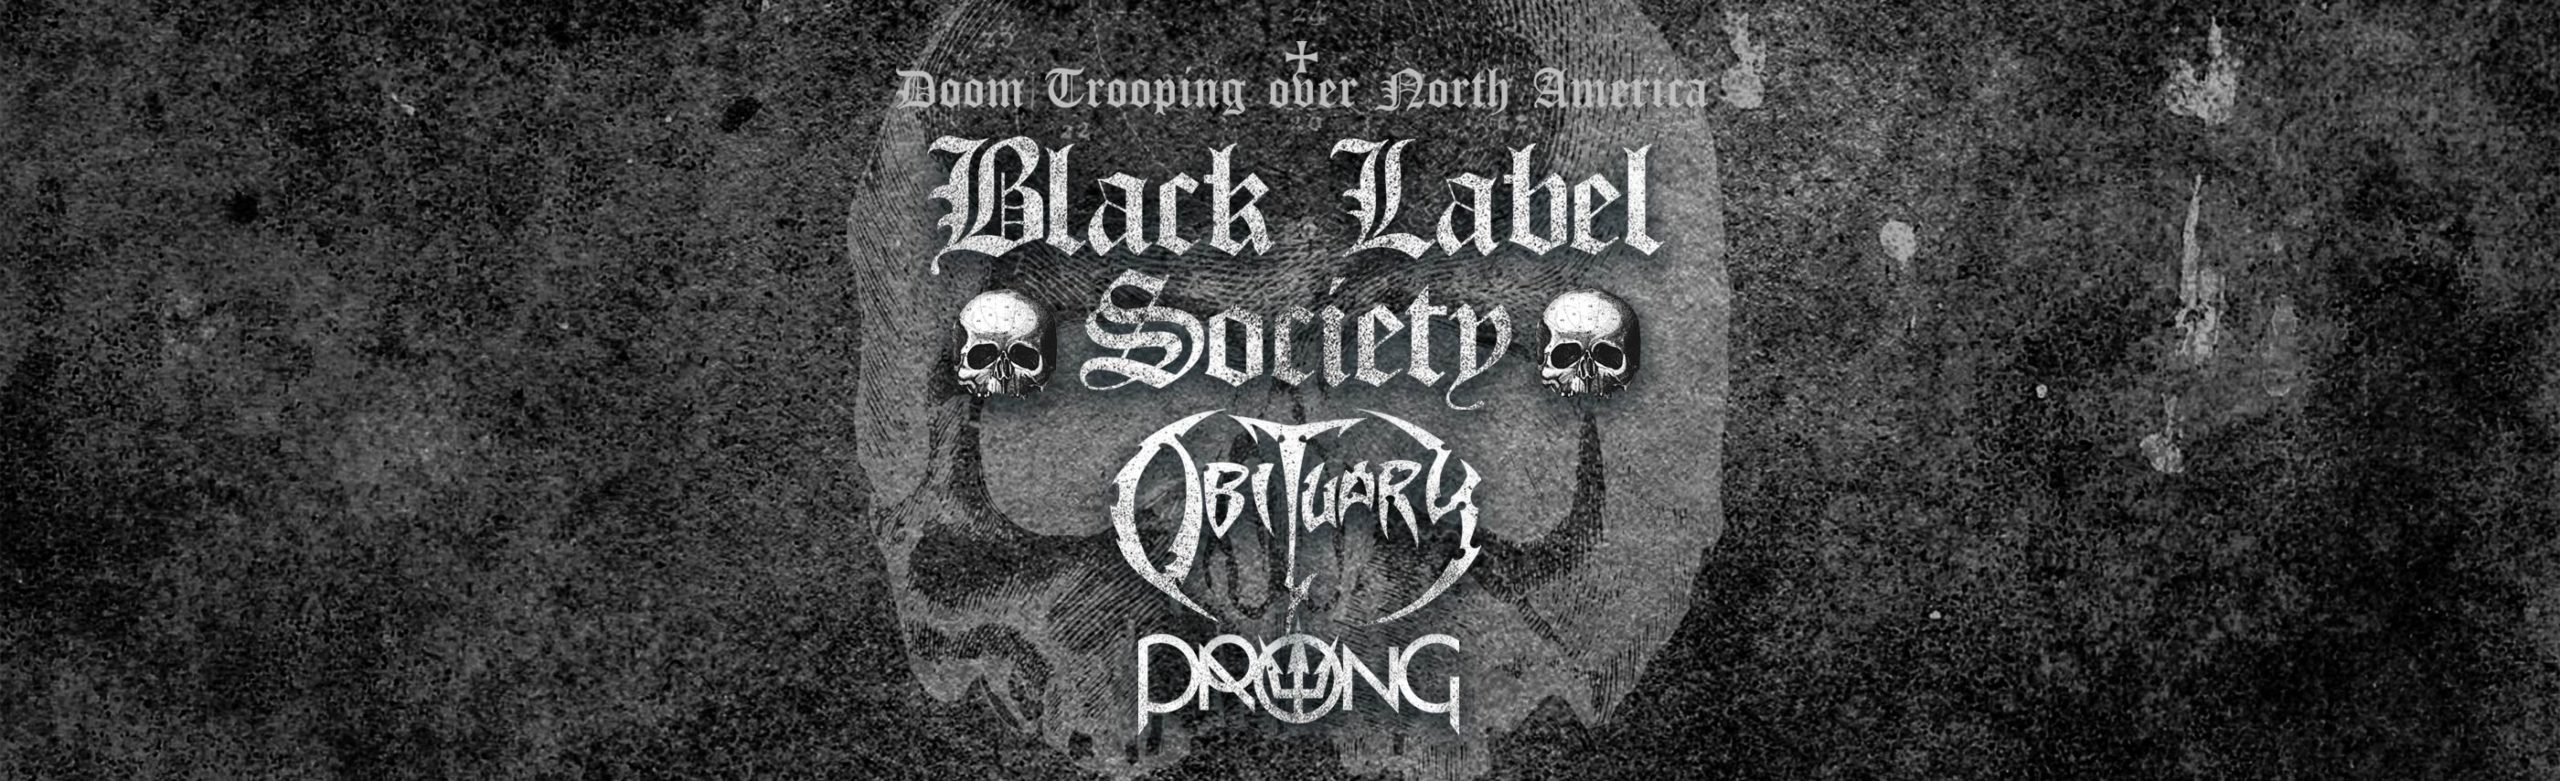 Black Label Society Announces Two Montana Shows with Obituary and Prong Image